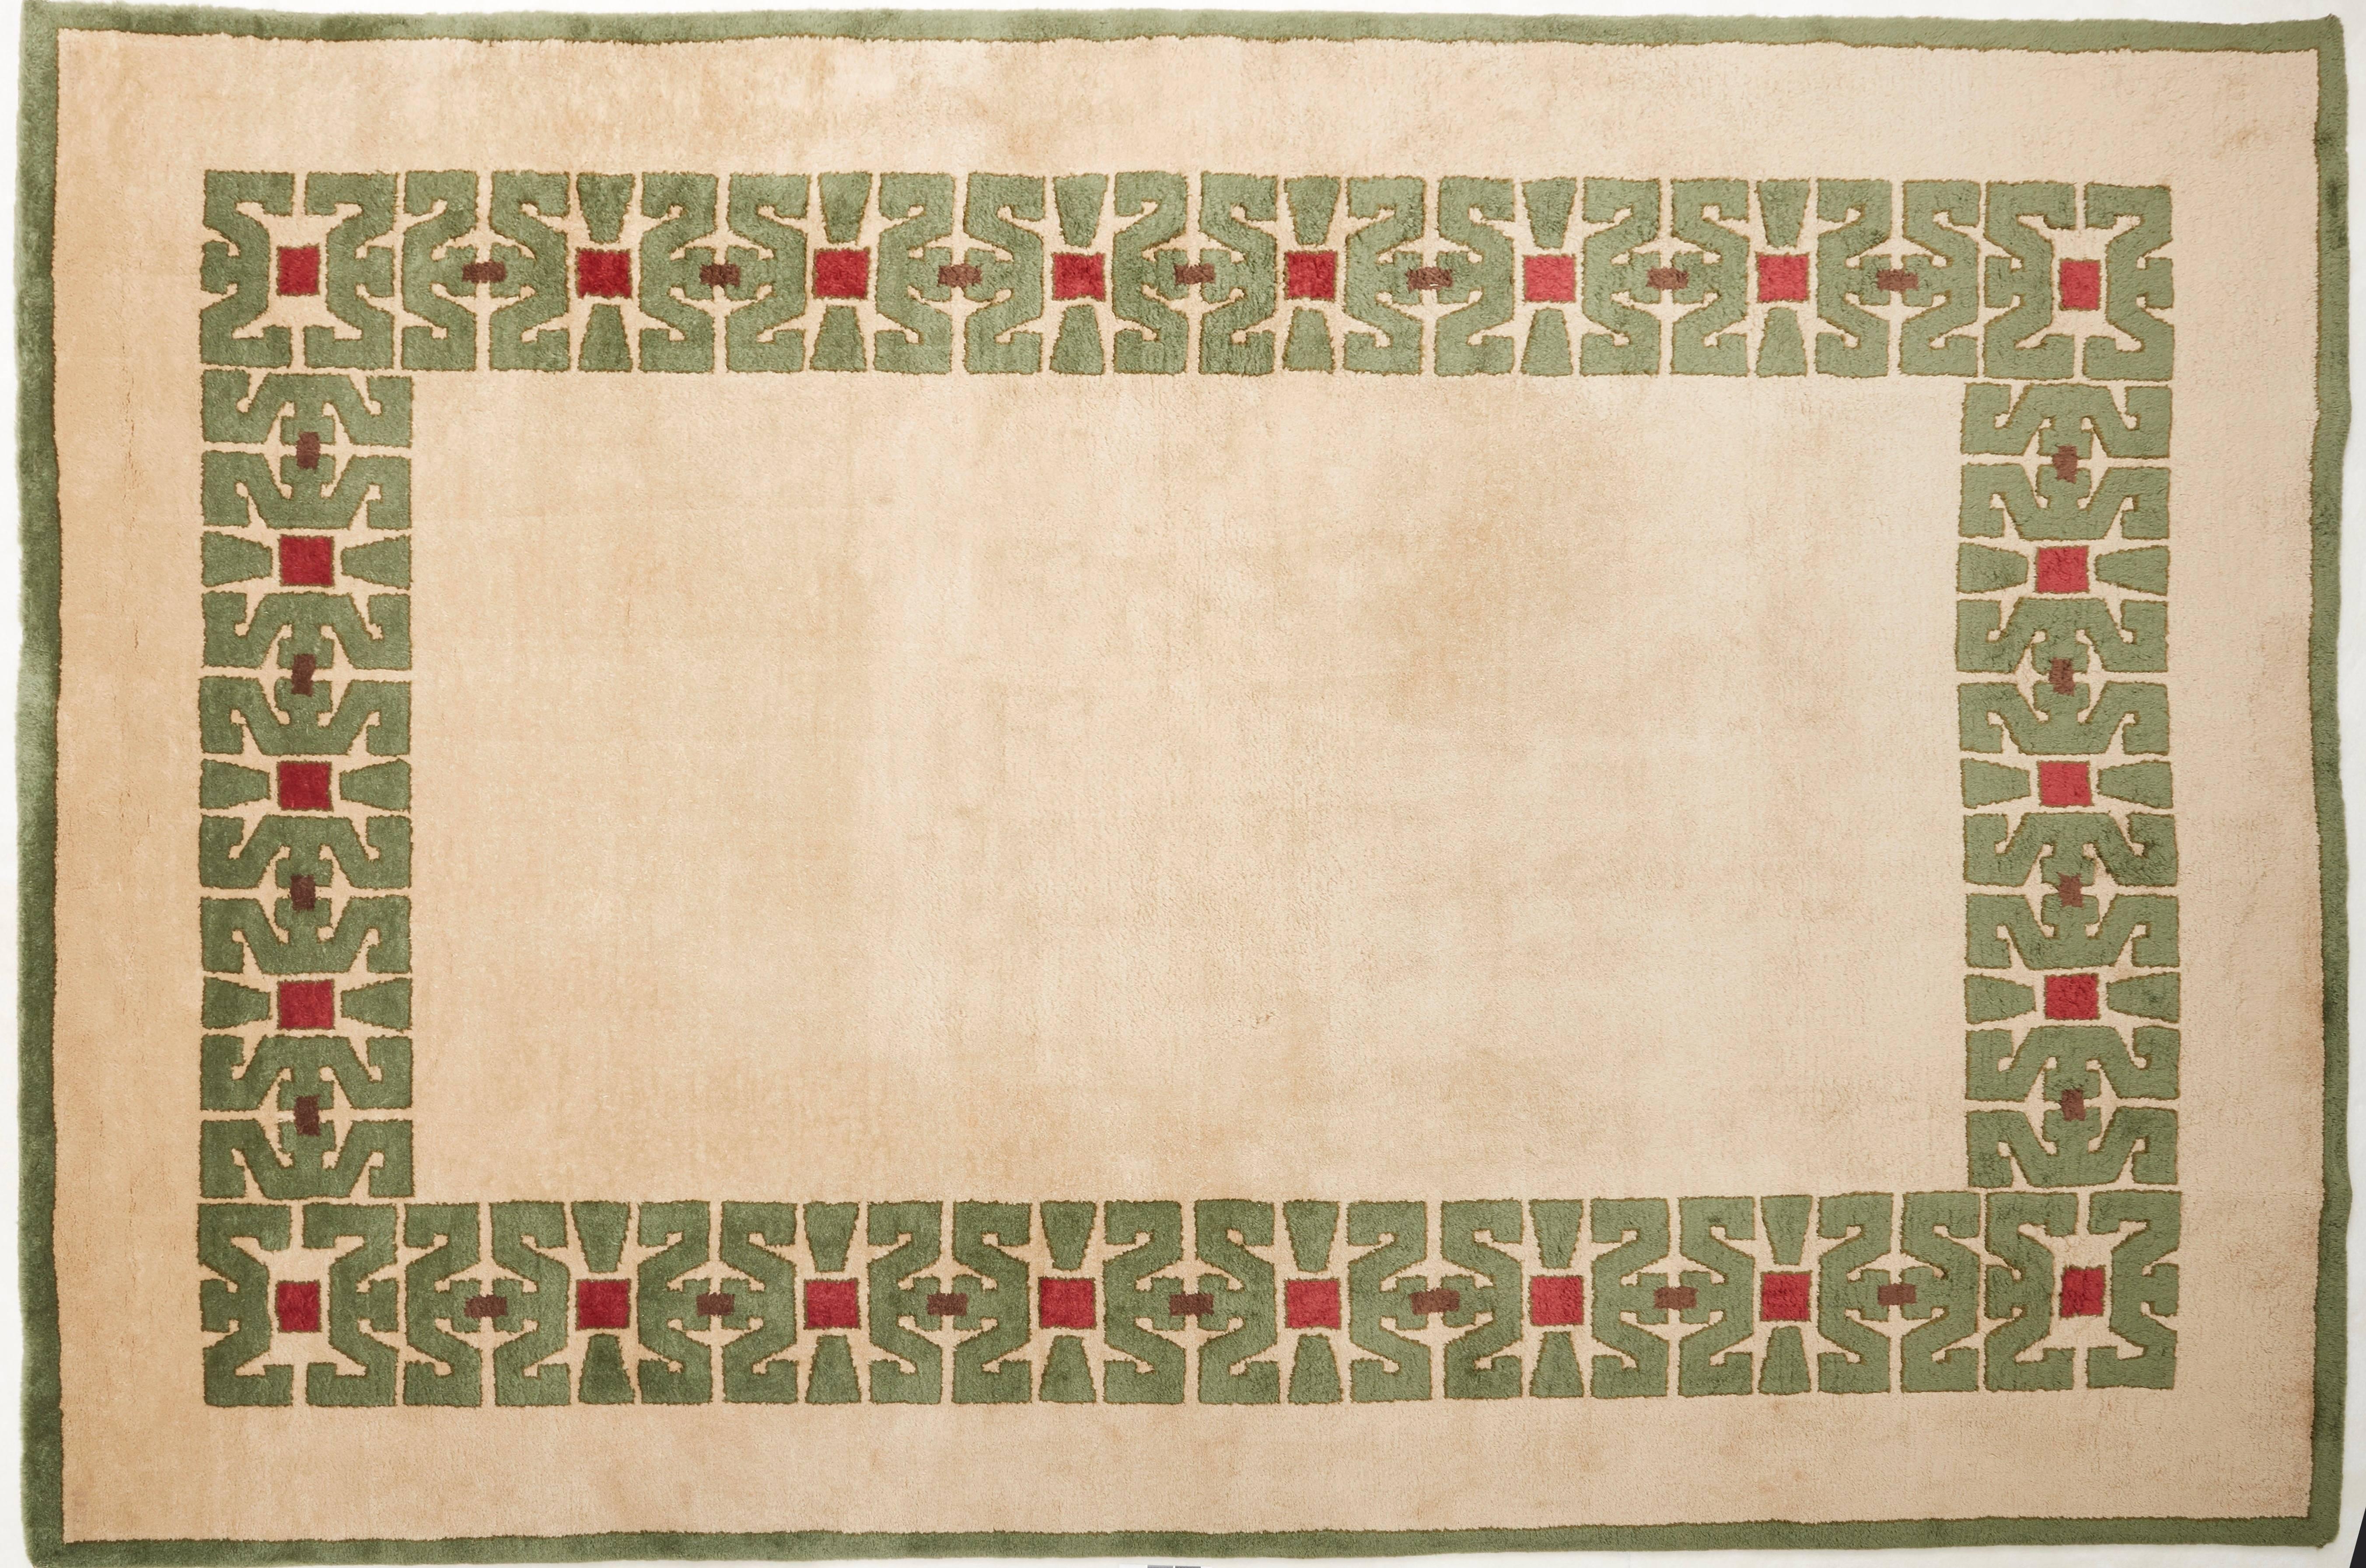 A Large knotted woollen rug with beige ground and green border, central decoration forming a frame with green, red and brown Aztec designs.